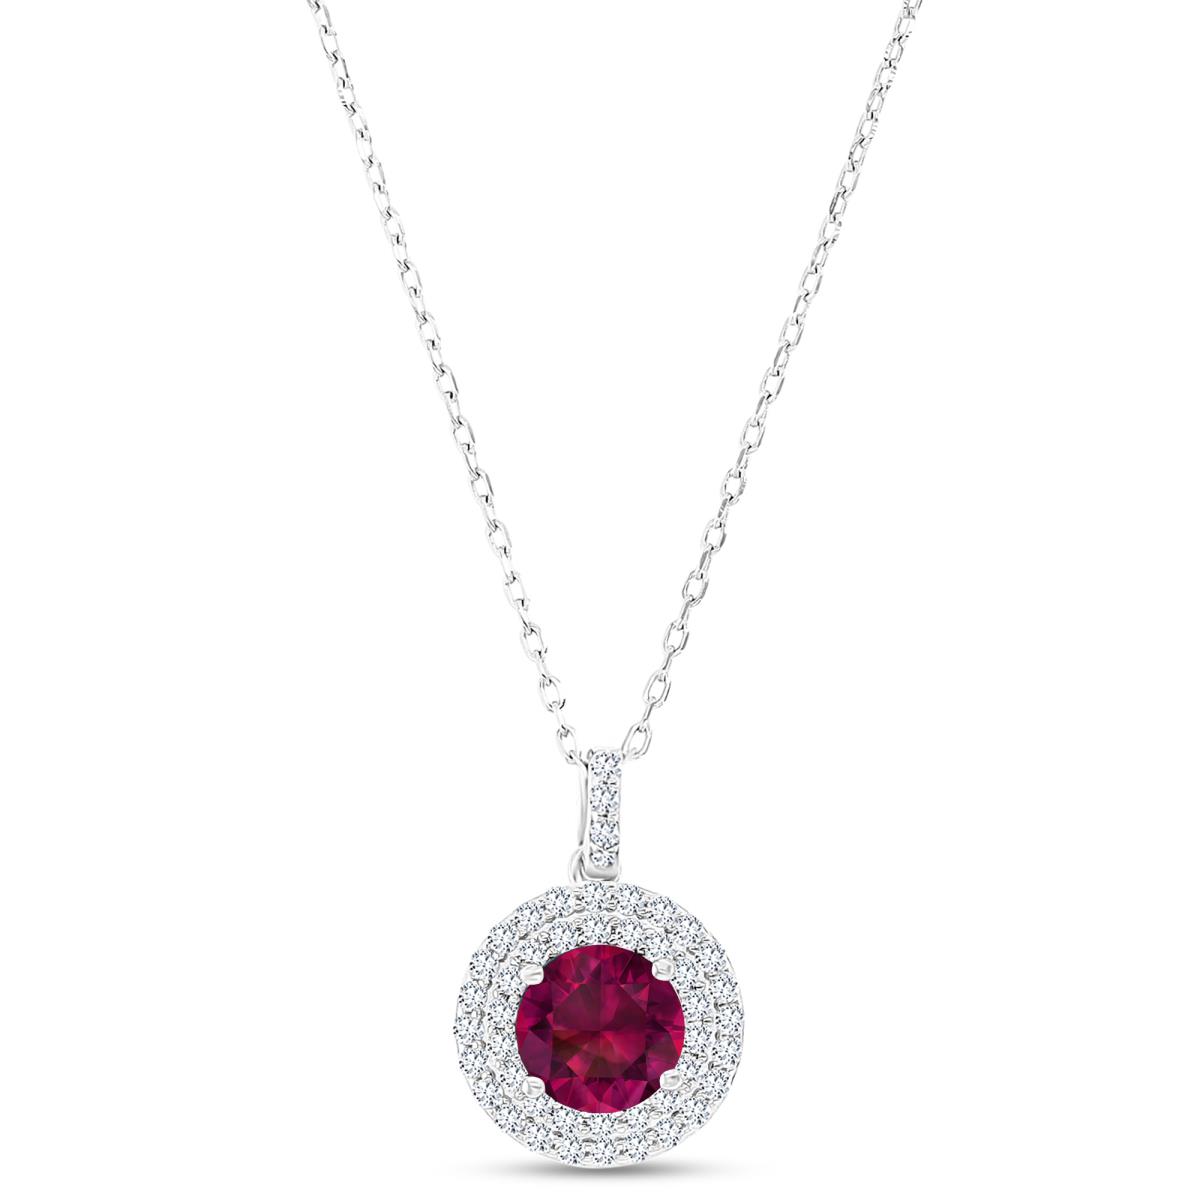 Sterling Silver Rhodium 7mm RD Cr Ruby / Cr White Sapphire Duble Halo 16"+2" Necklace